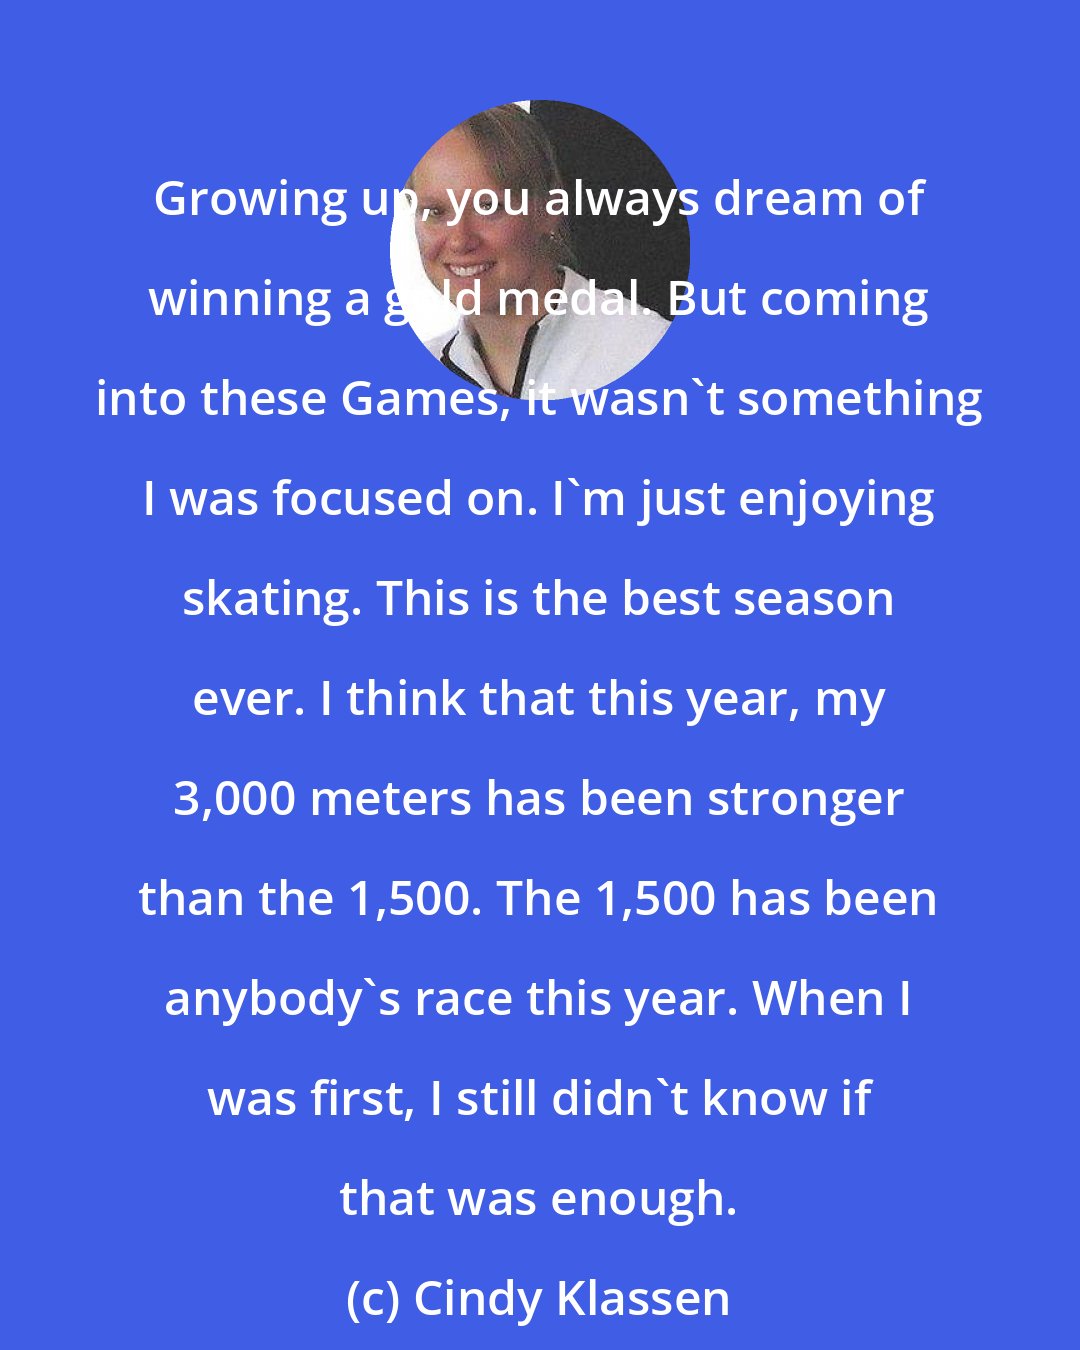 Cindy Klassen: Growing up, you always dream of winning a gold medal. But coming into these Games, it wasn't something I was focused on. I'm just enjoying skating. This is the best season ever. I think that this year, my 3,000 meters has been stronger than the 1,500. The 1,500 has been anybody's race this year. When I was first, I still didn't know if that was enough.